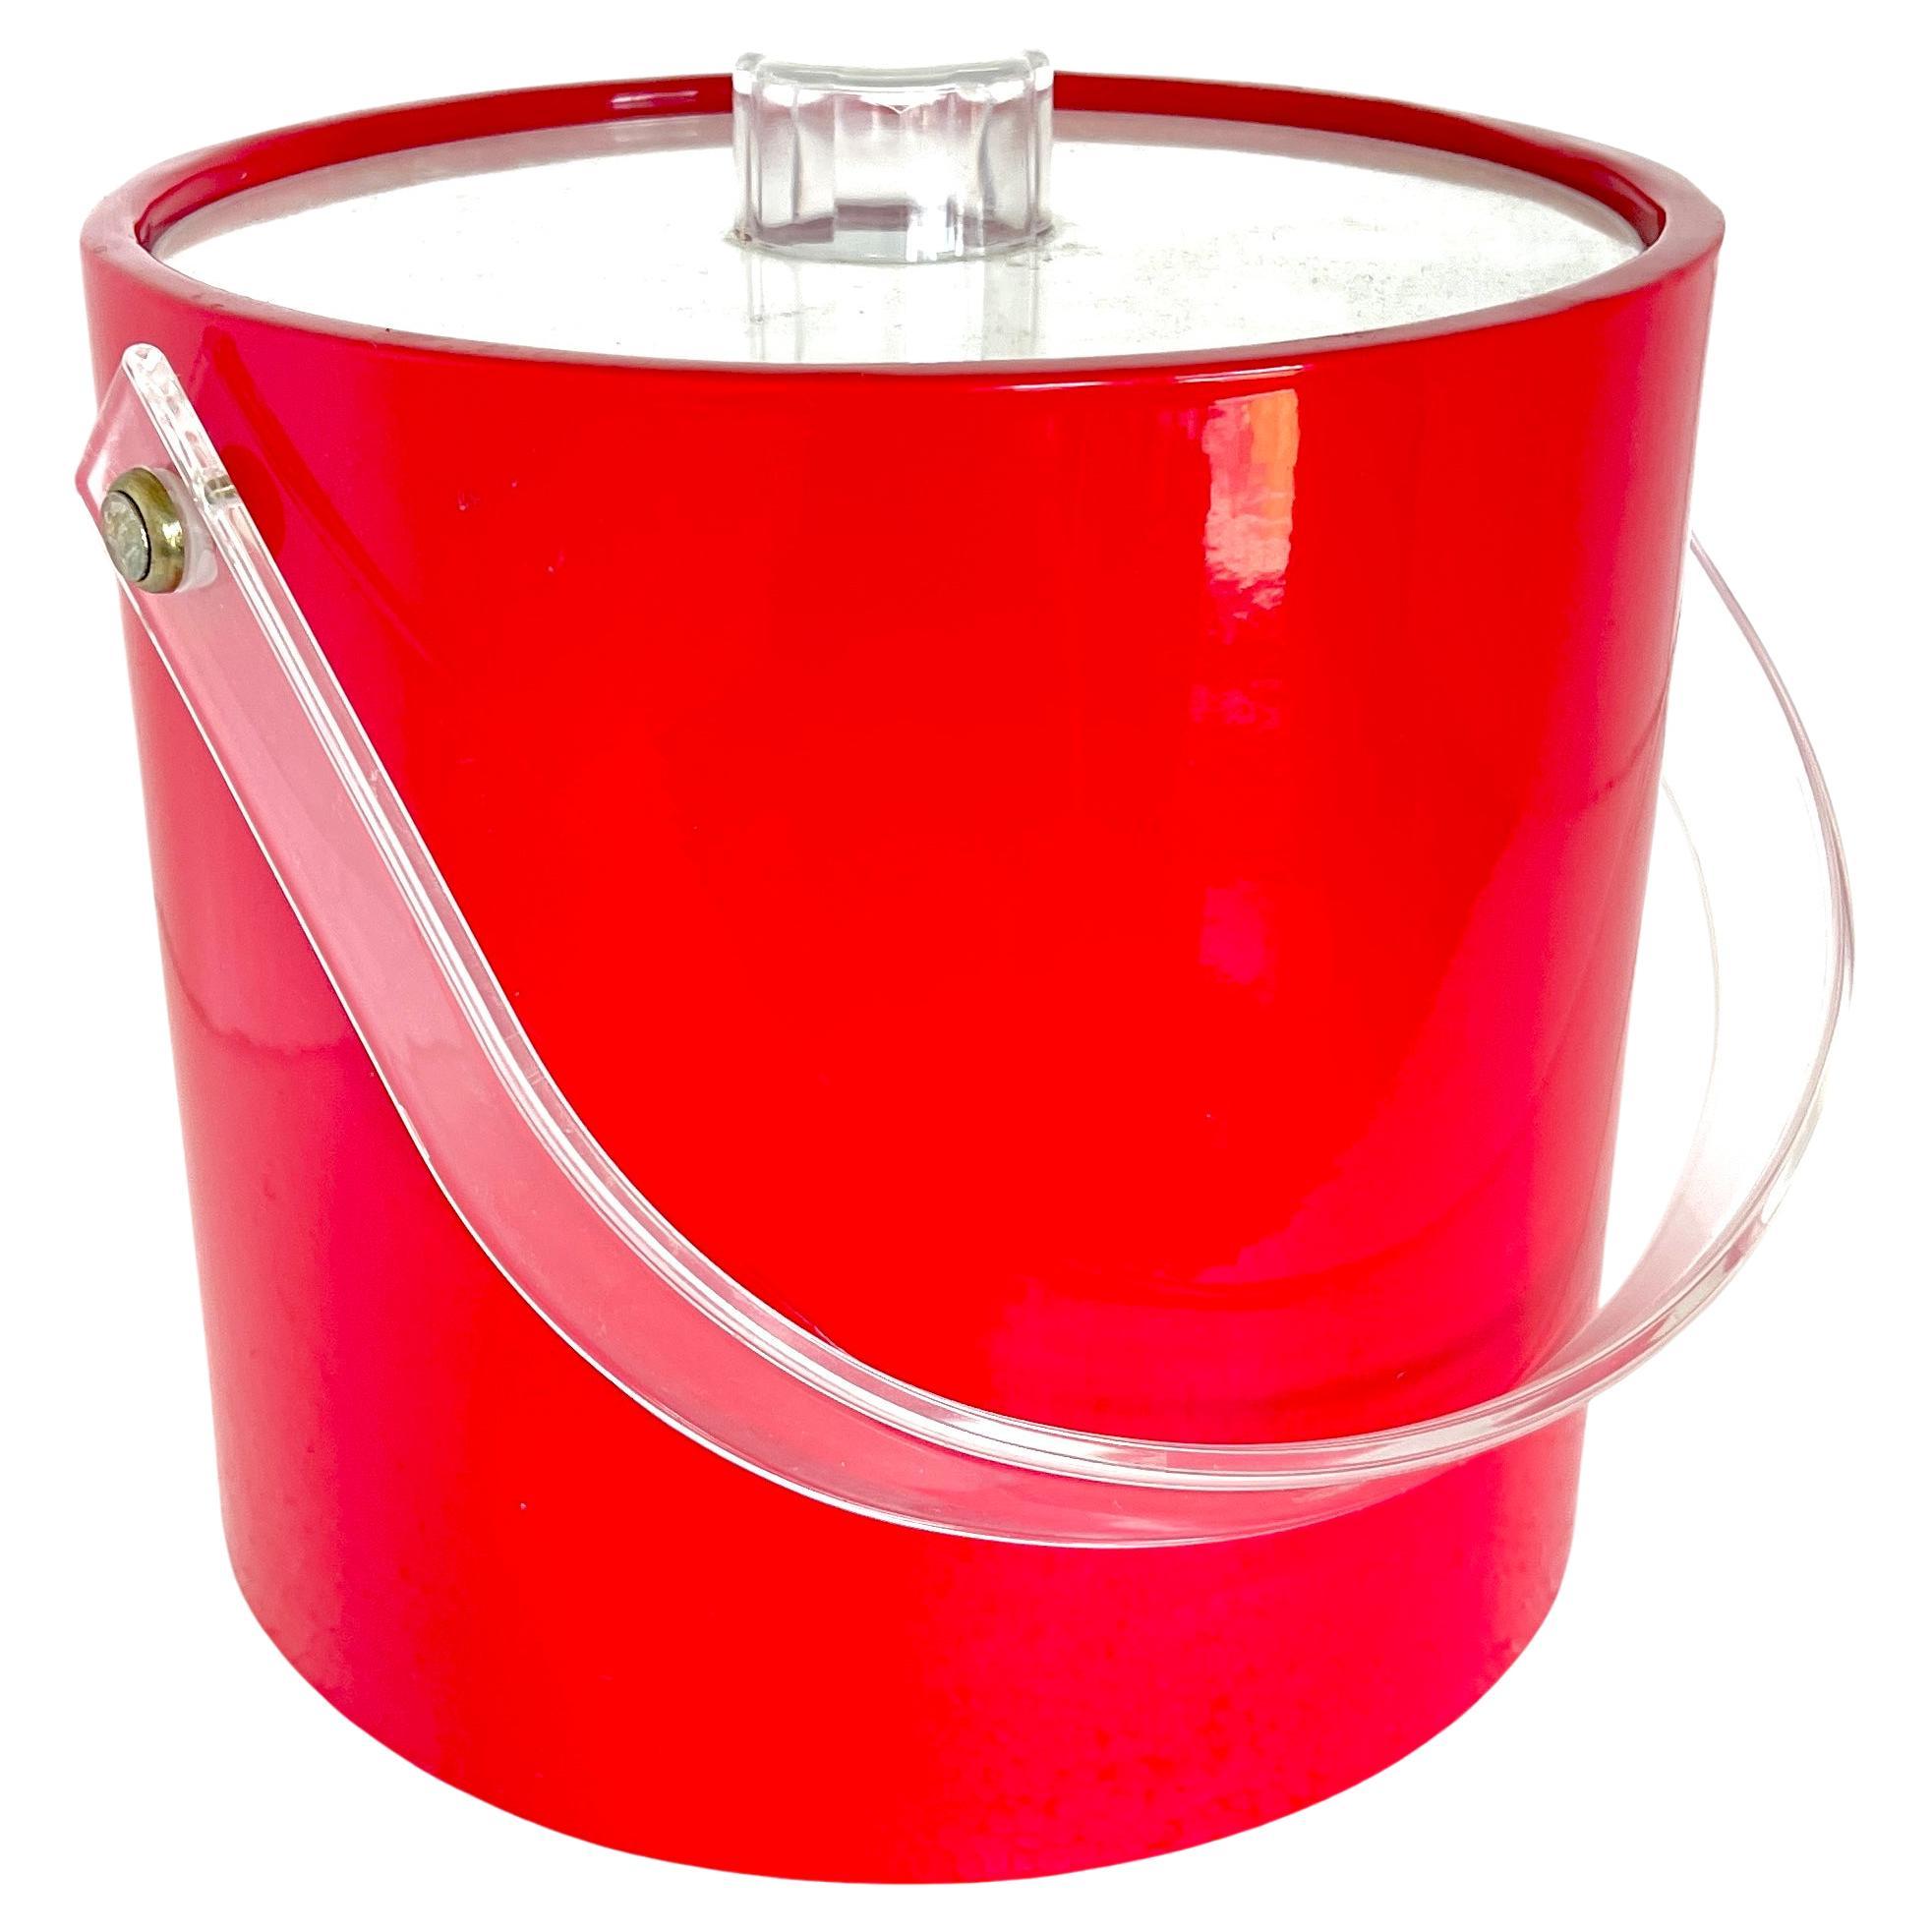 Plastic Mid-Century Modern Red Faux Leather Ice Bucket, circa 1960's